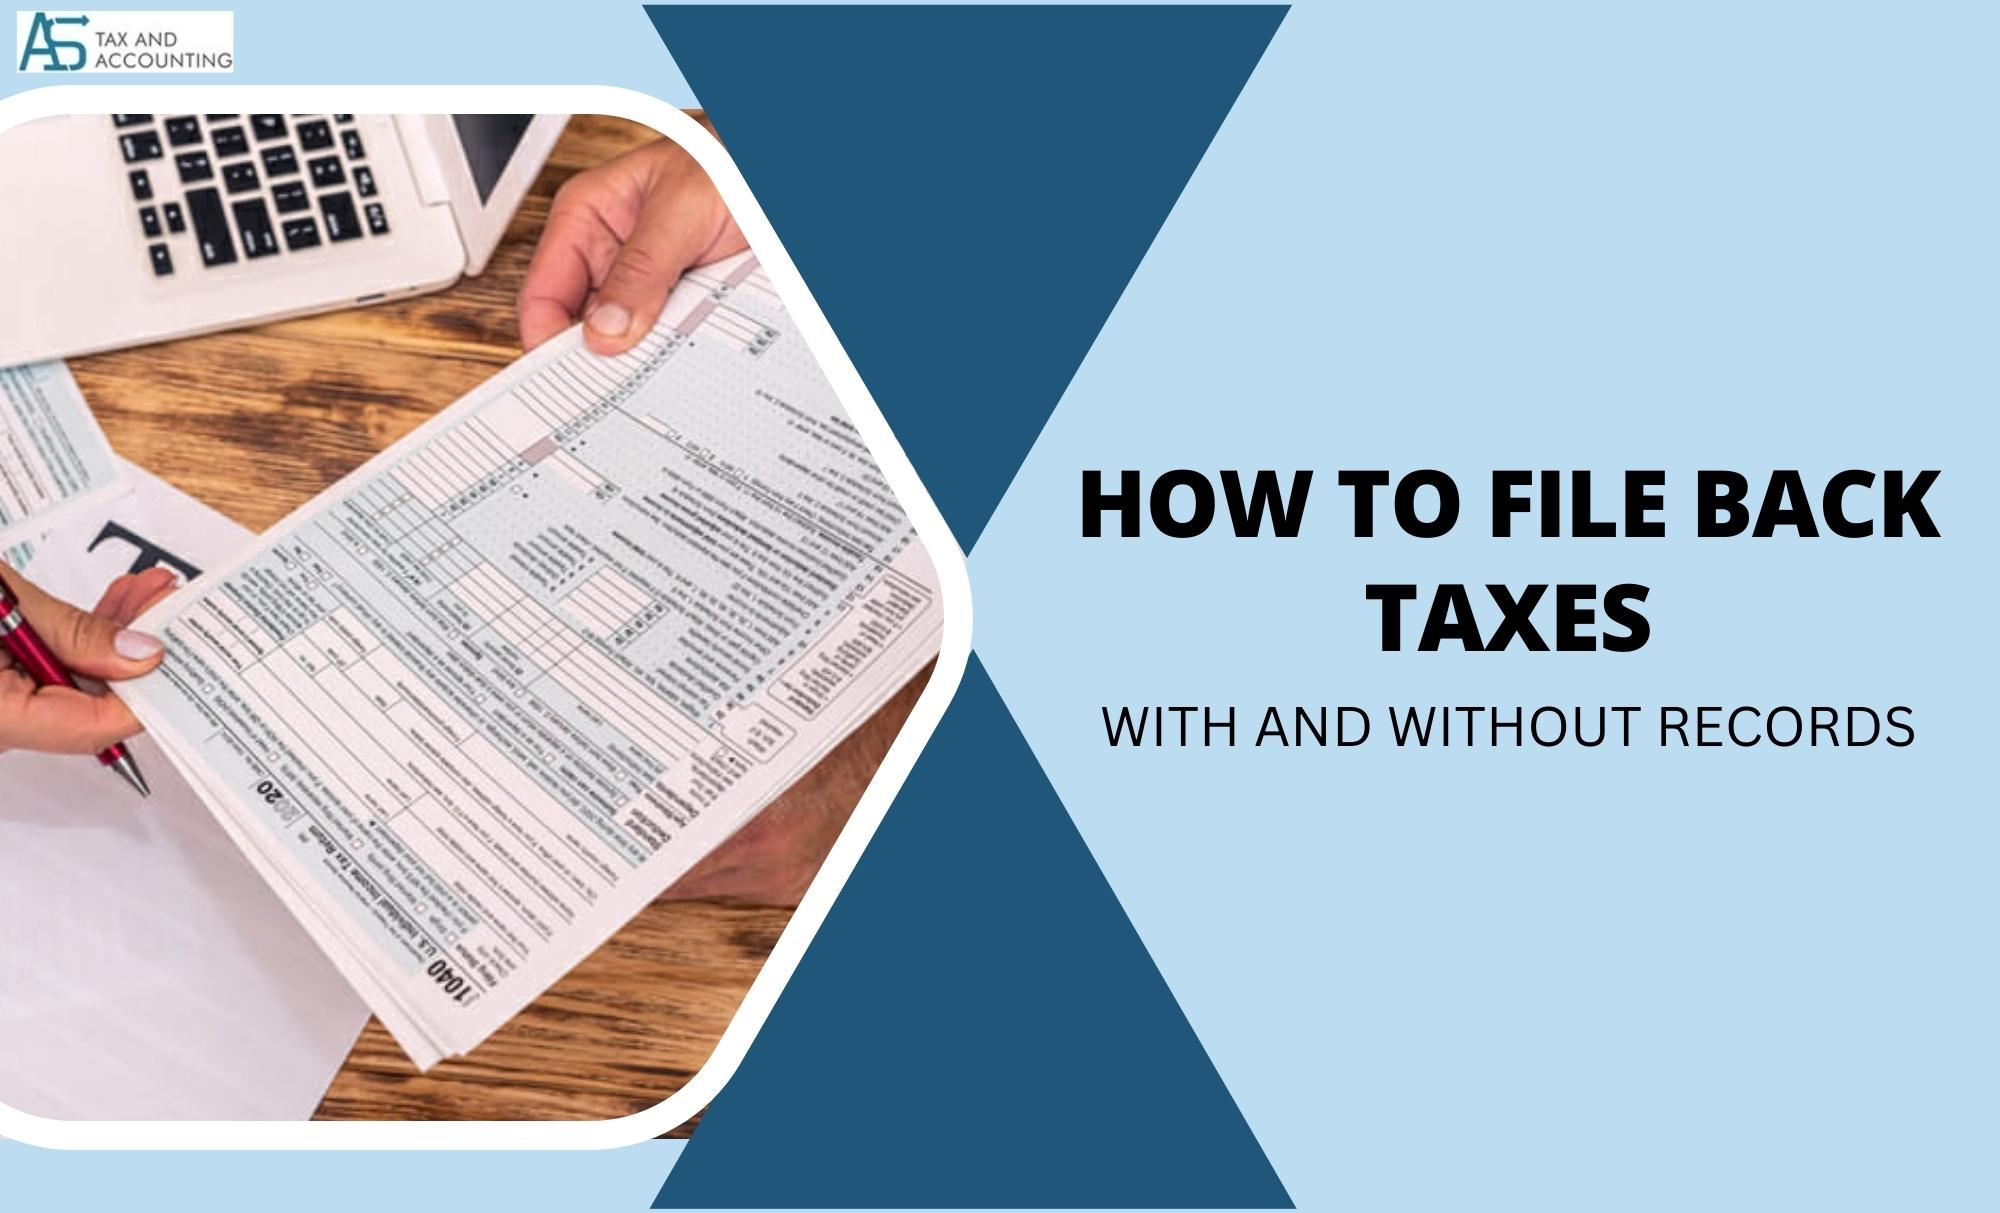 File Back Taxes With 3 Easy Steps